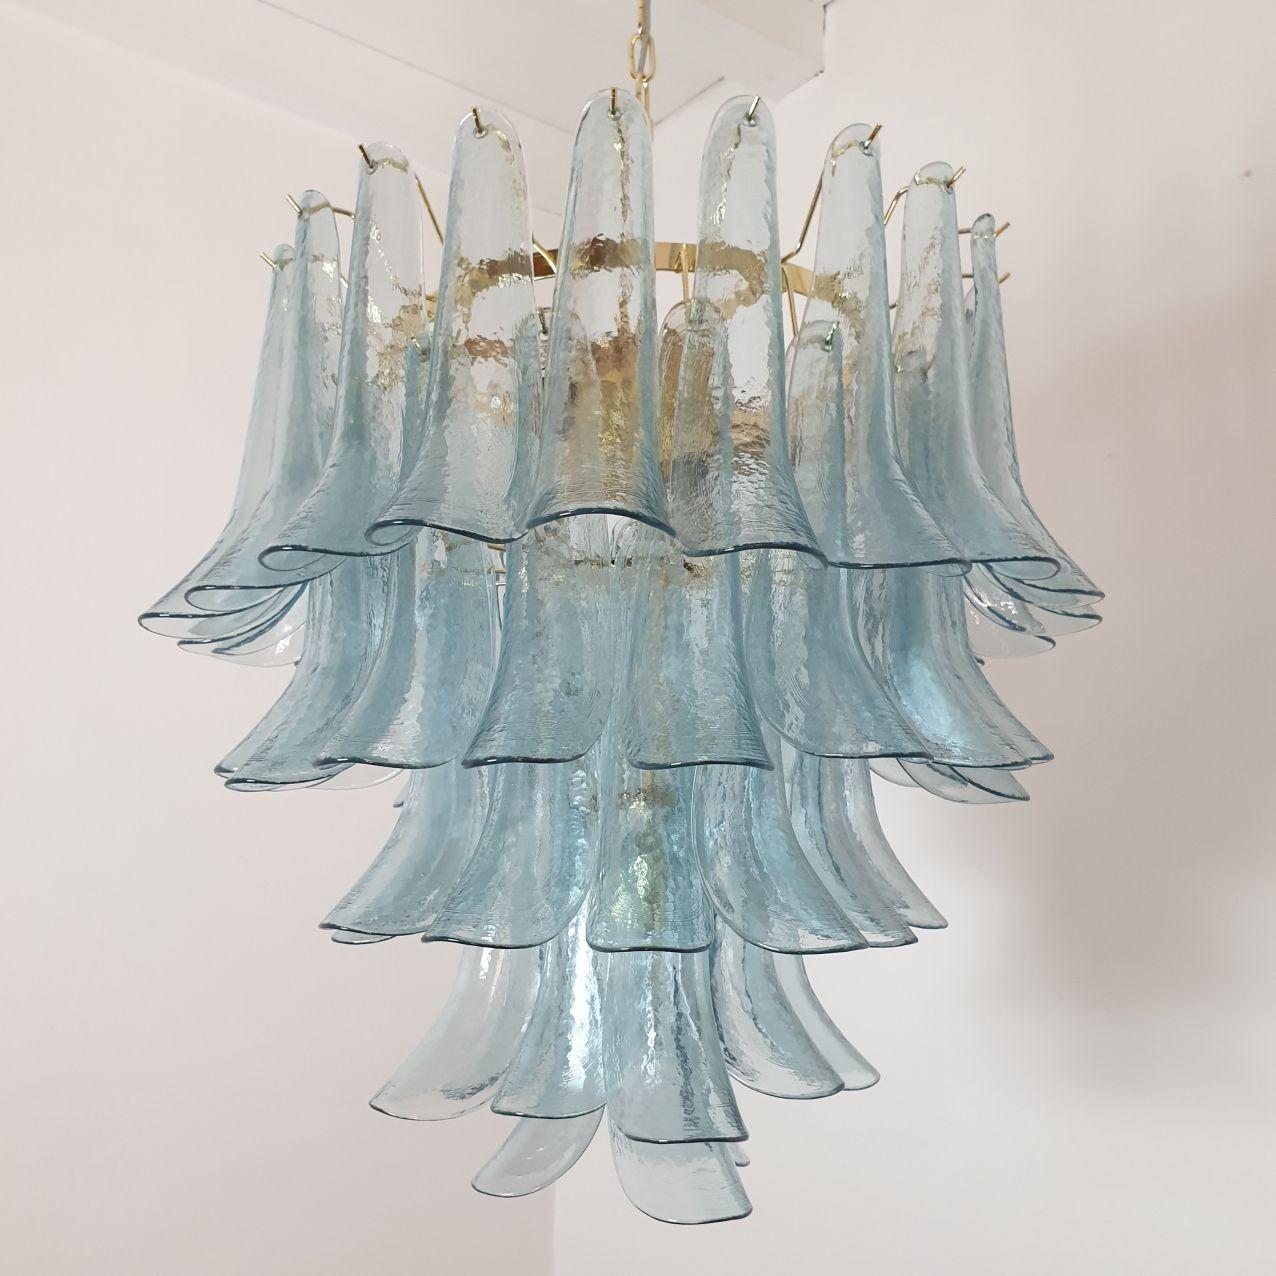 Mid century modern five-tier light blue Murano glass chandelier, by Mazzega, Italy, 1980s.
The light blue Murano glass chandelier is made of delicate handmade petal glasses, and a gold plated frame.
The Murano glass chandelier has seven lights, and